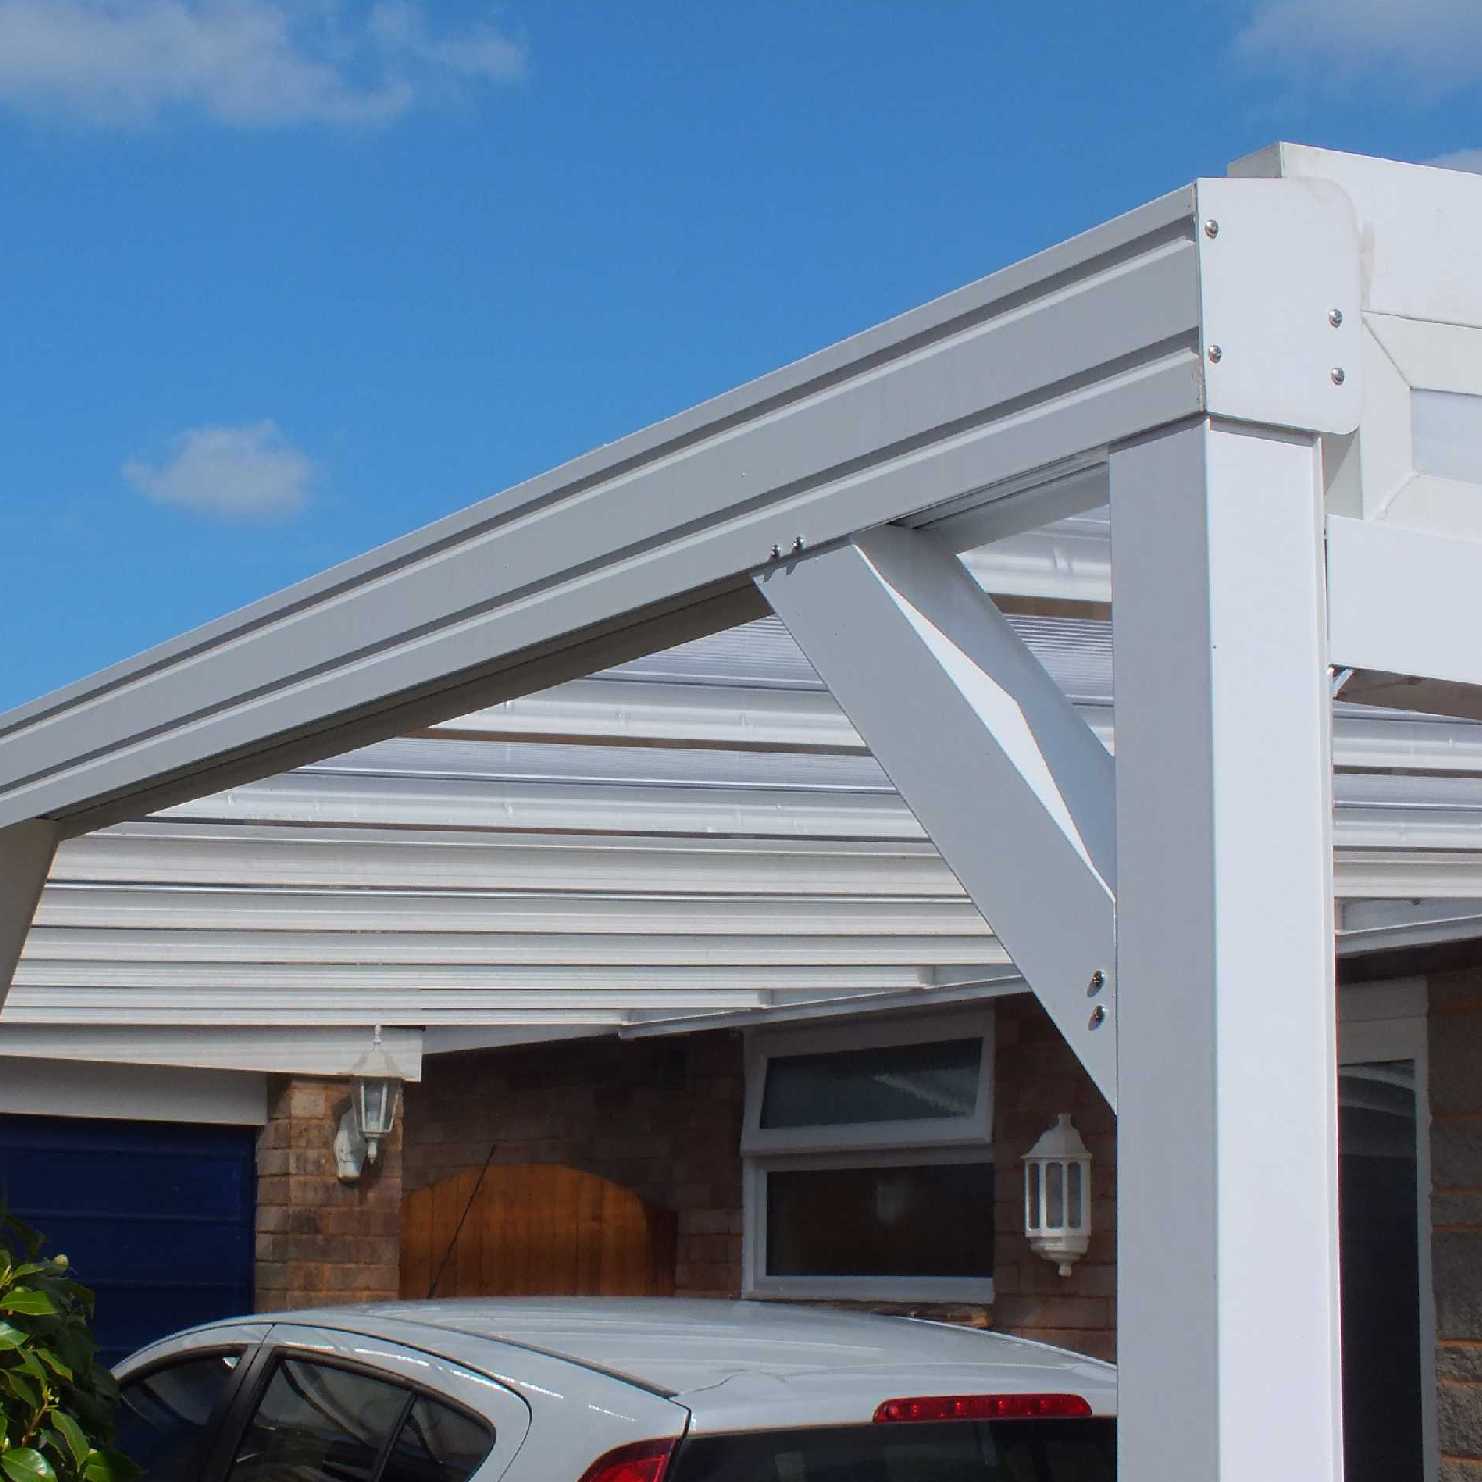 Buy Omega Smart Lean-To Canopy, White with 16mm Polycarbonate Glazing - 9.9m (W) x 4.0m (P), (5) Supporting Posts online today